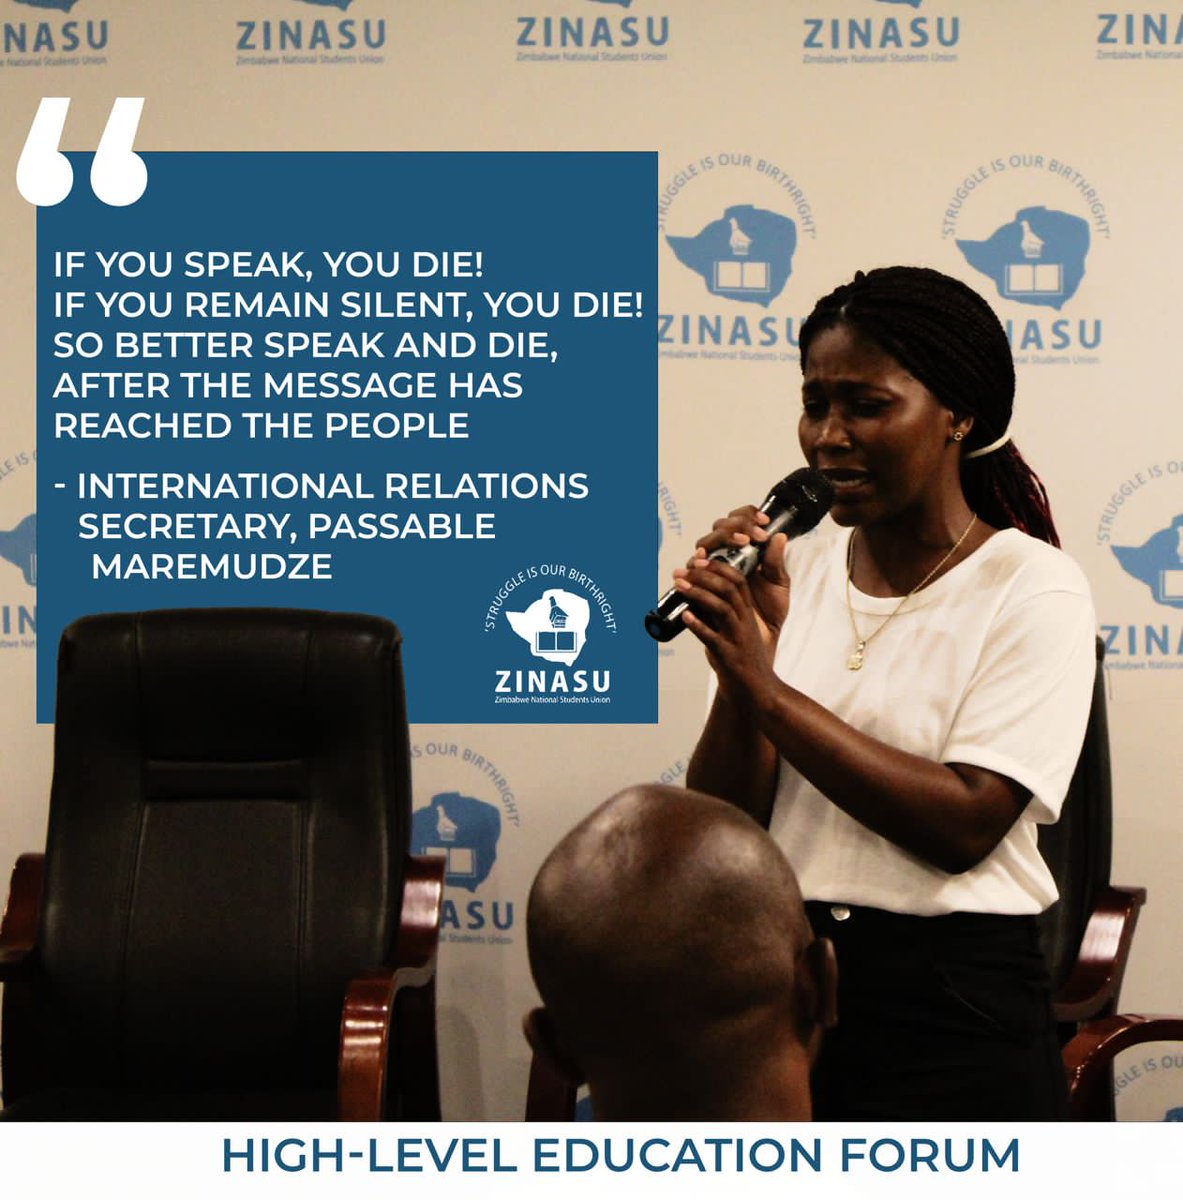 Like a famous saying we have in Zimbabwe, 'There's freedom of speech, but there is no freedom after speech.' We rather speak out than be oppressed.
#HighLevelEducationForum
#EducatiomForAll
@Zinasuzim @amnesty_zim @advocatemahere